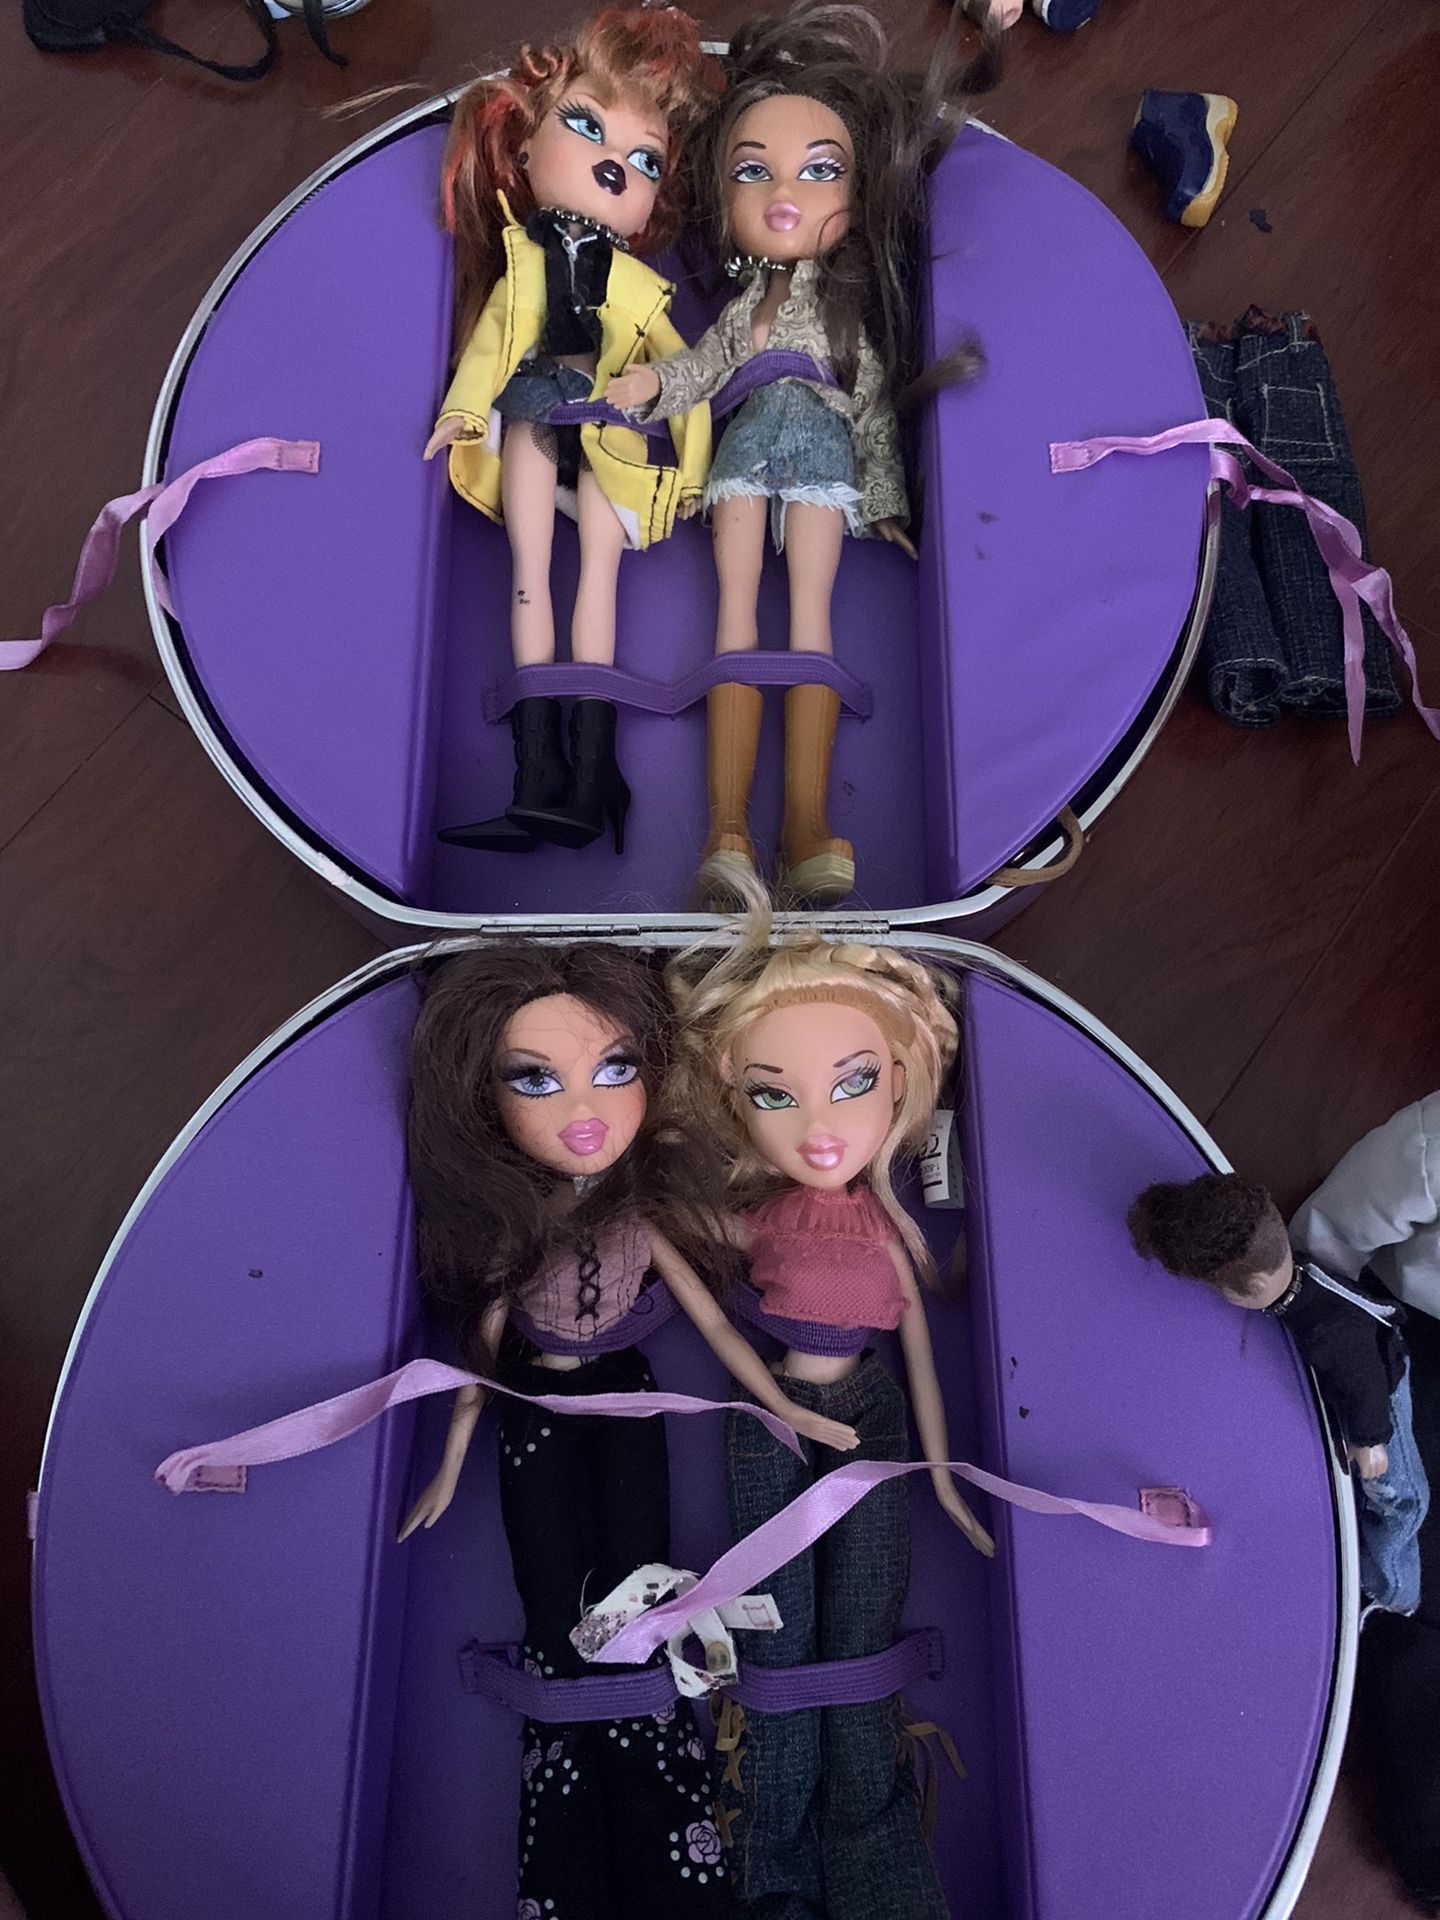 Bratz dolls with case and over 100 dollars in accessories